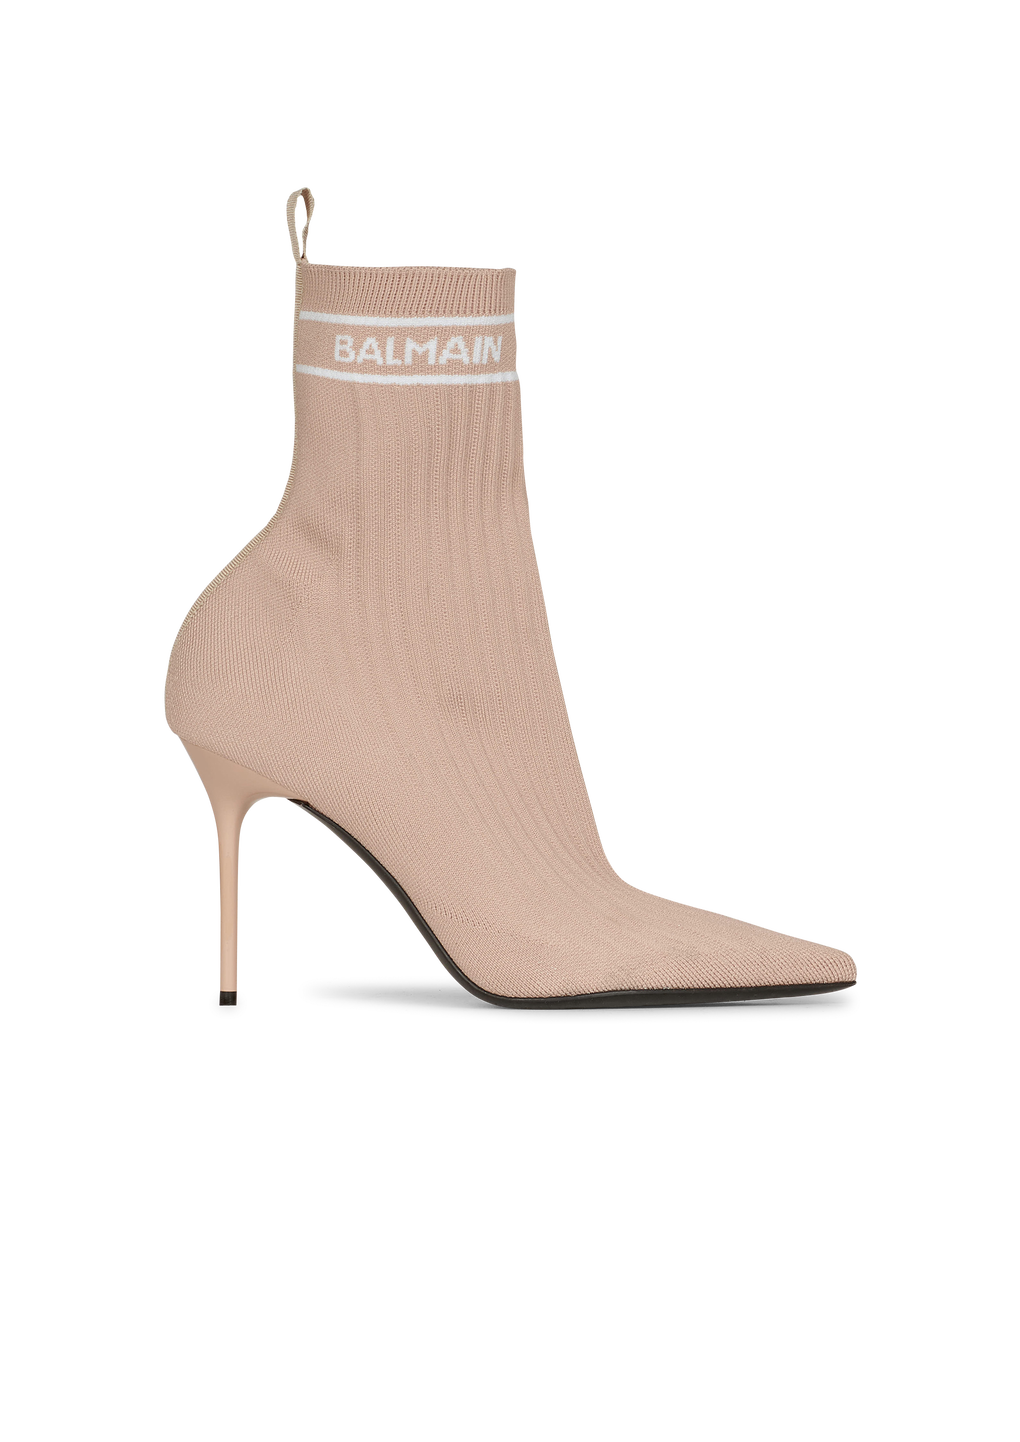 Stretch knit Skye ankle boots, pink, hi-res